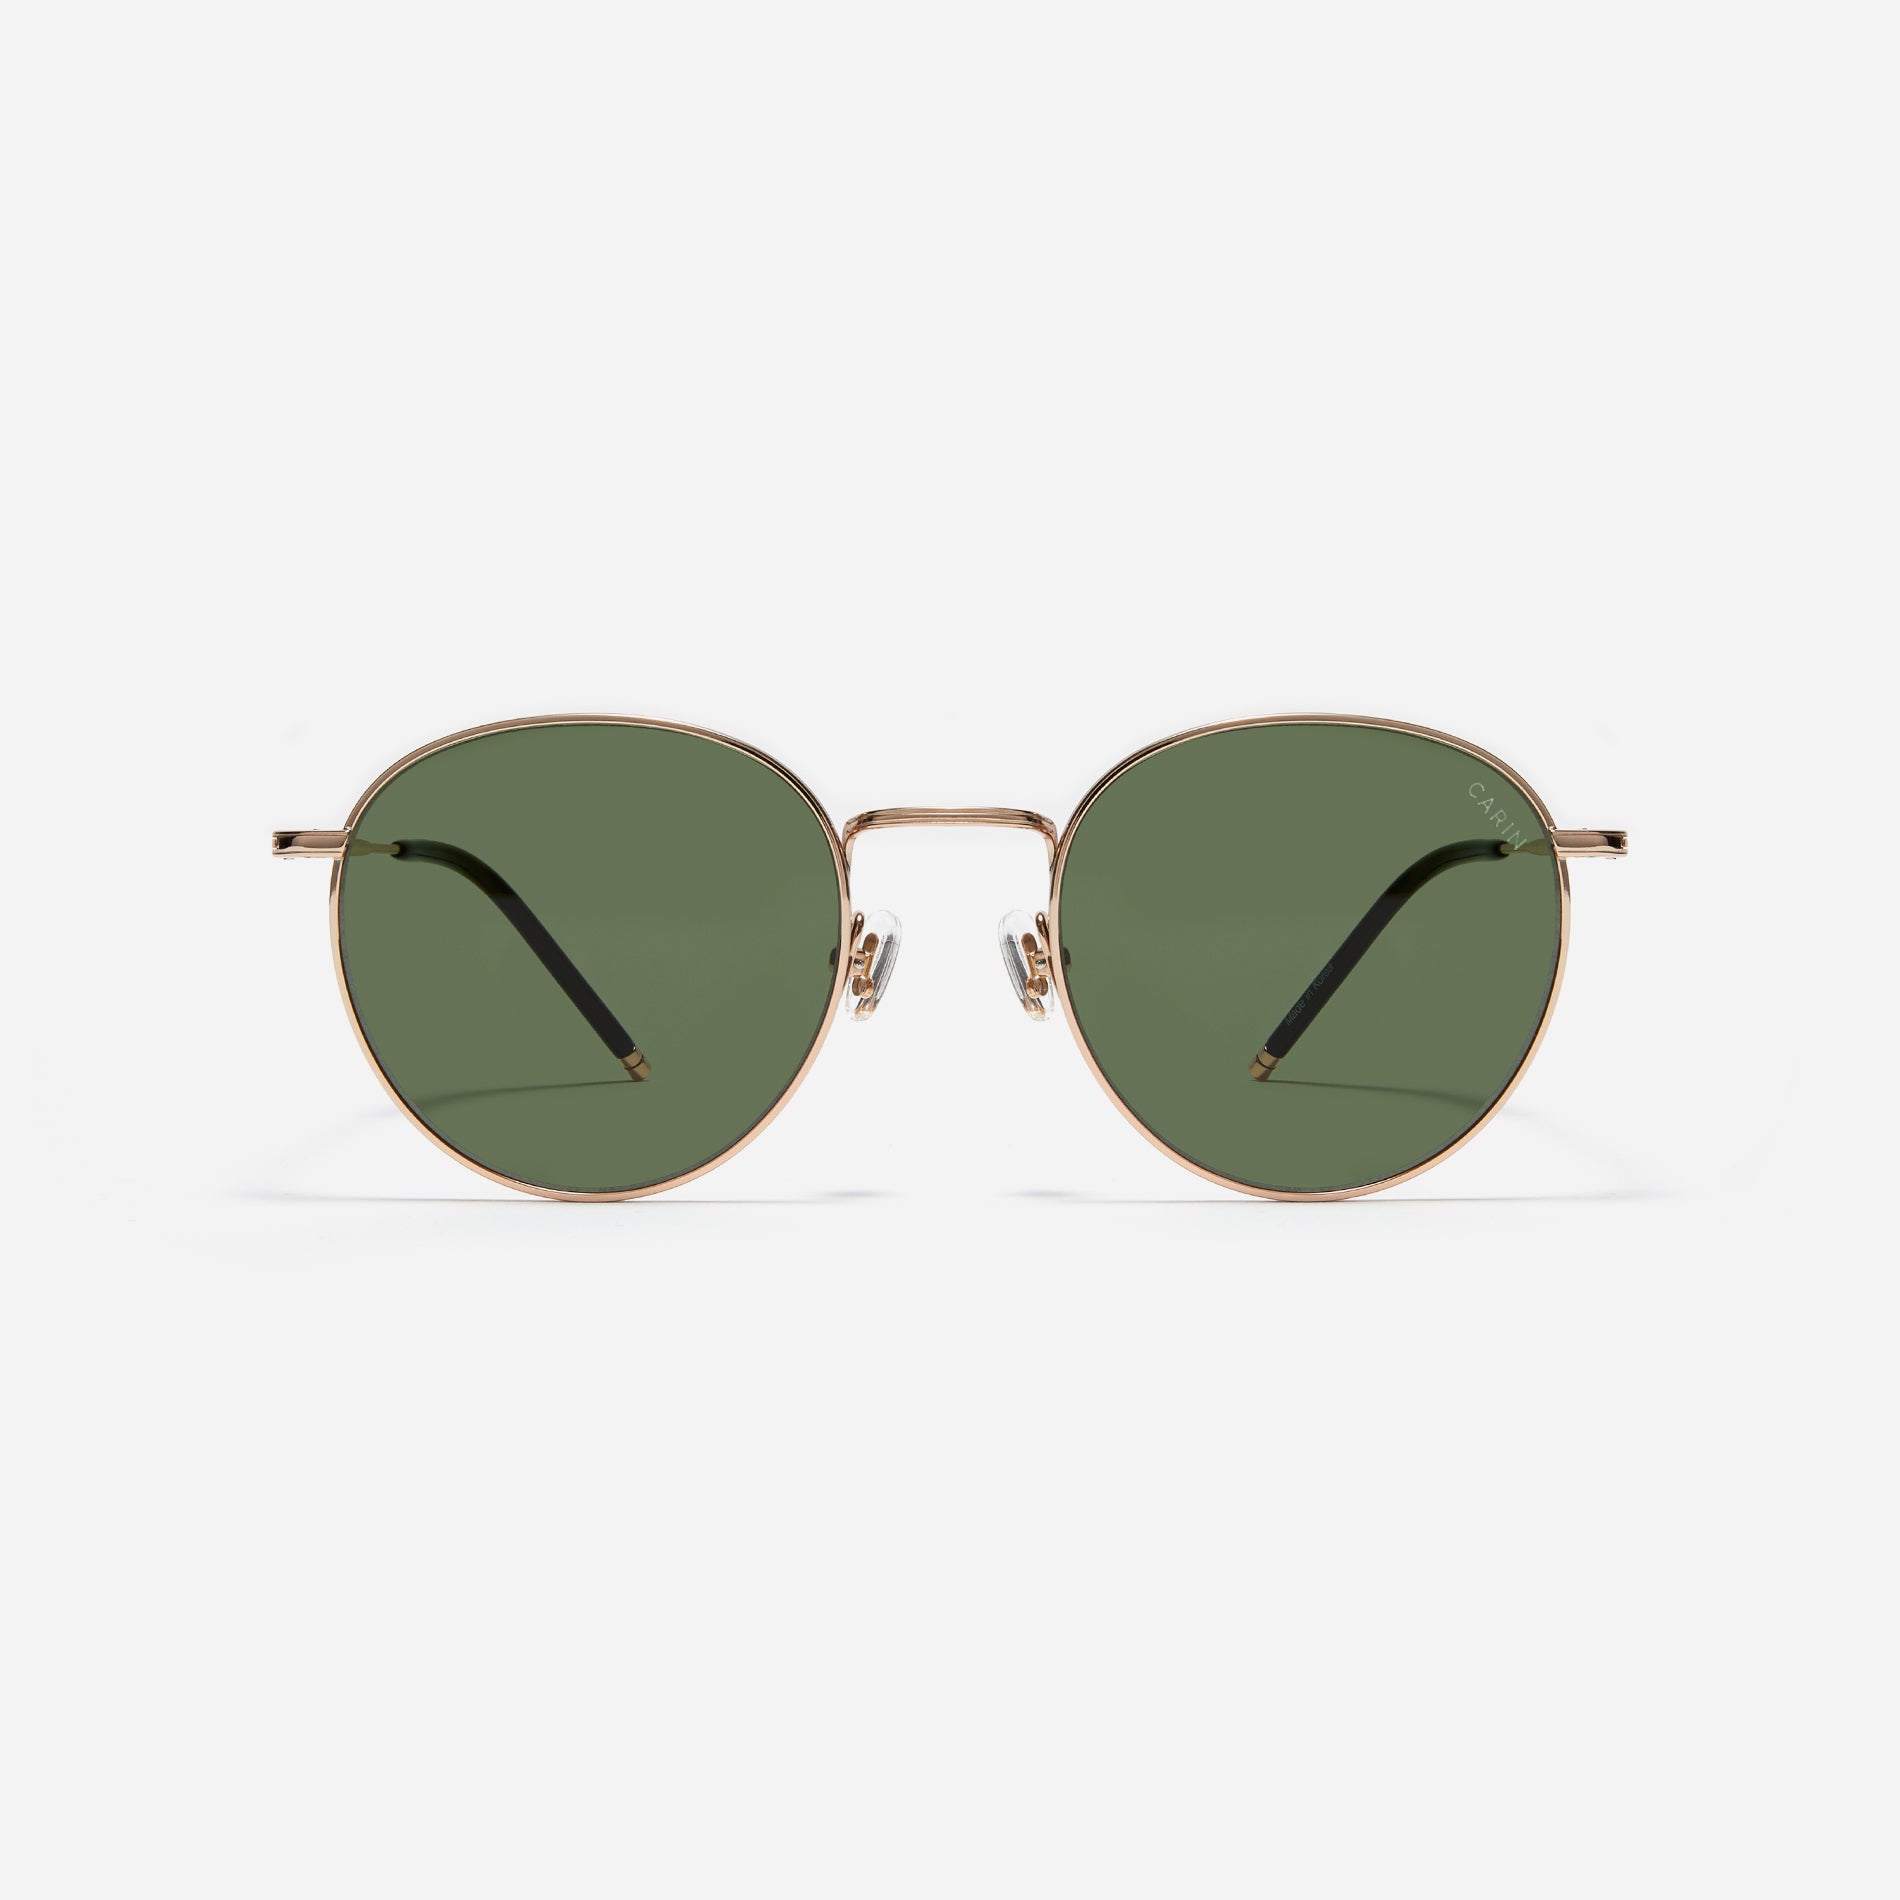 Round-shaped metal sunglasses that offer a soft and natural look with a peach-shaded titanium frame. 